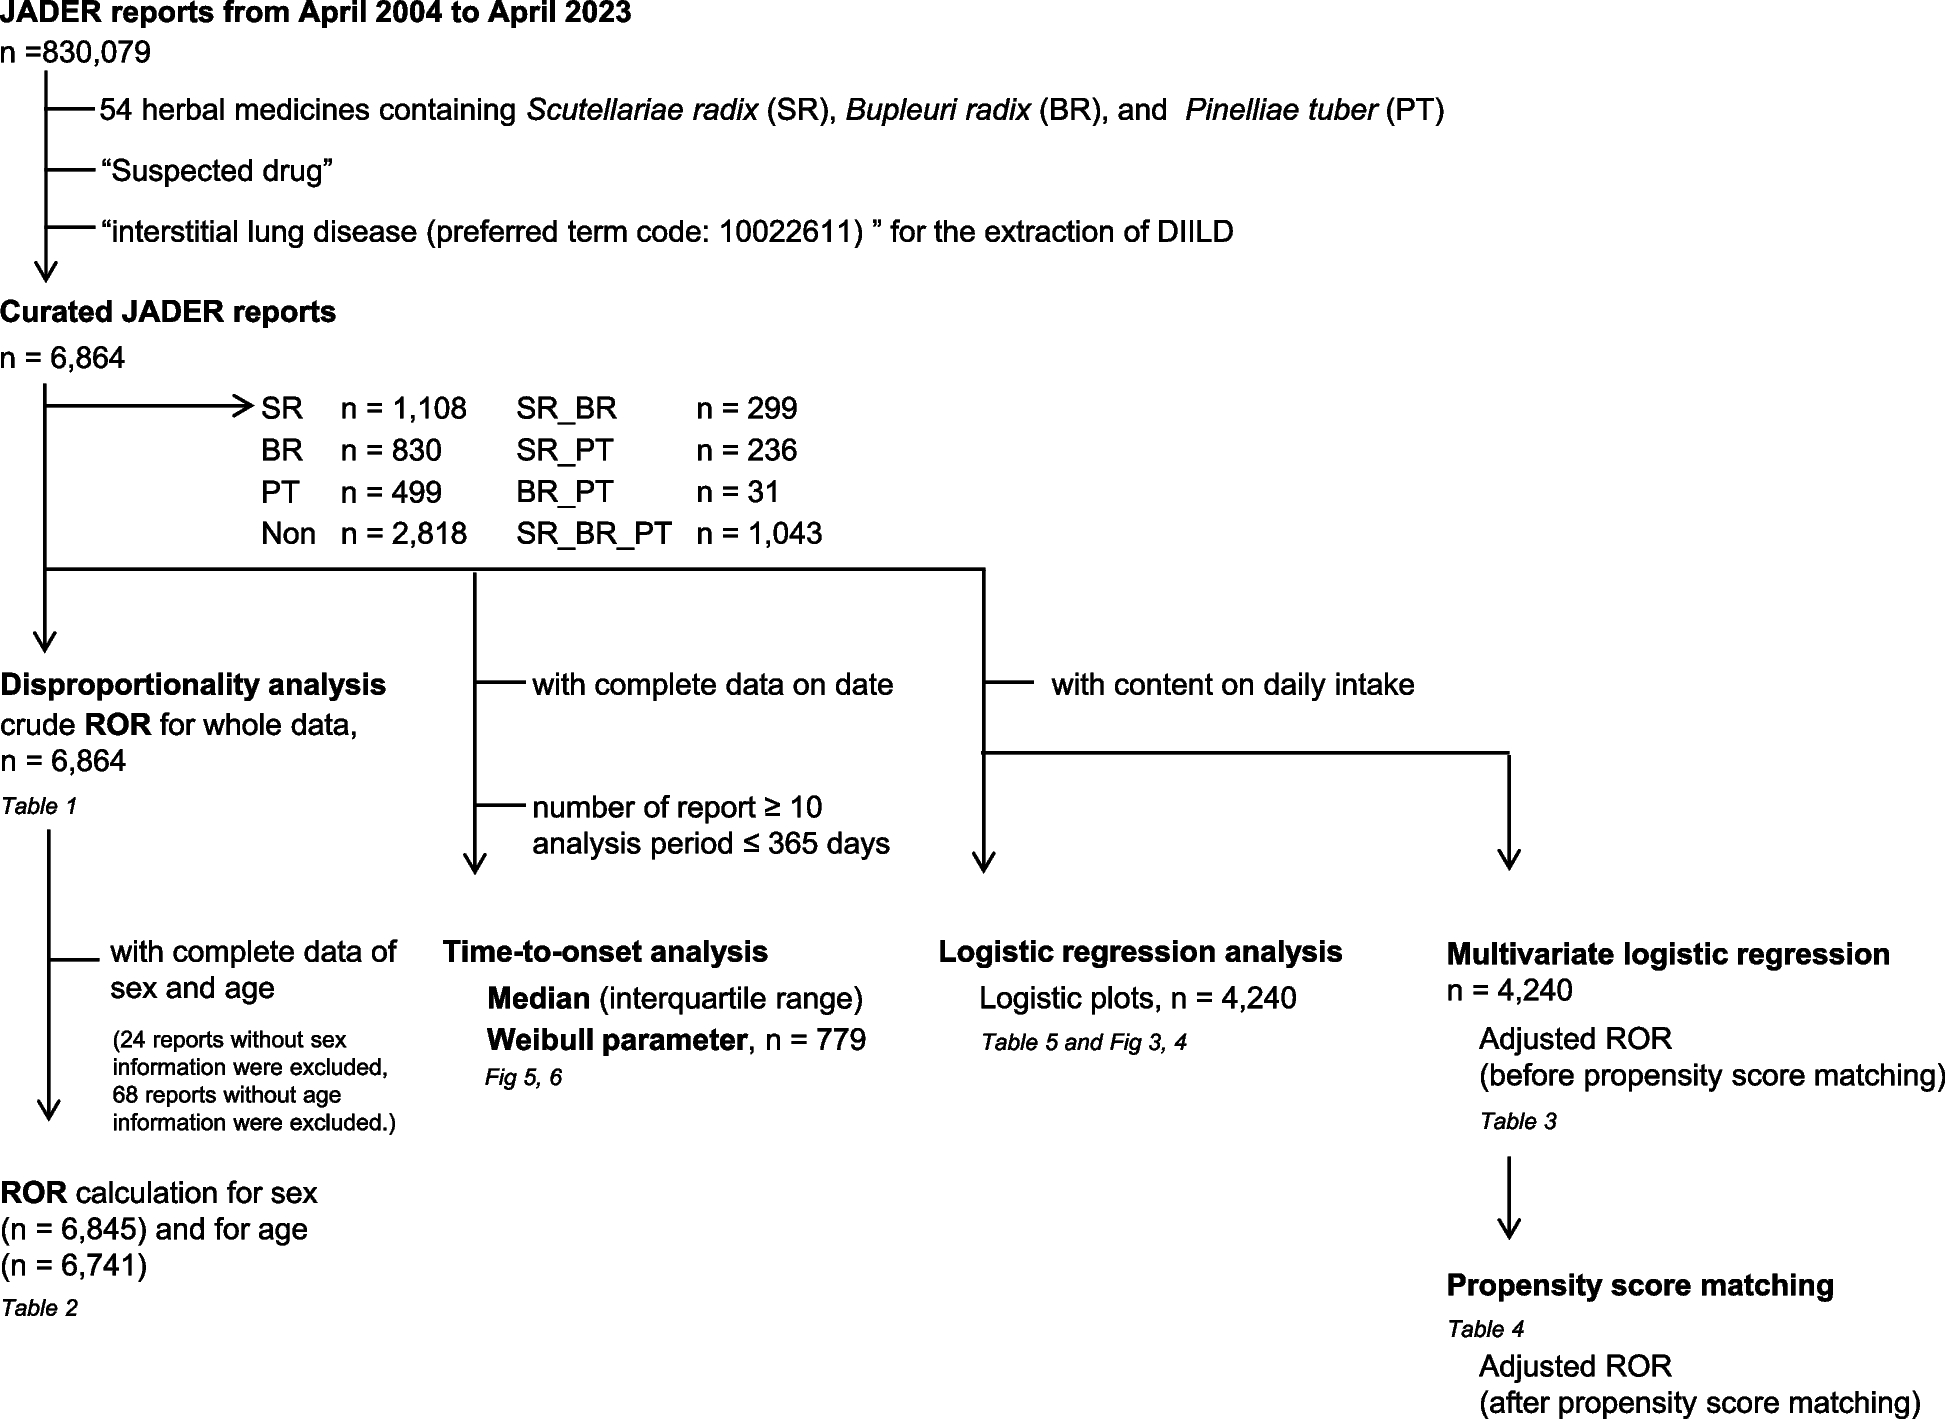 Analysis of drug-induced interstitial lung disease caused by herbal medicine using the Japanese Adverse Drug Event Report database